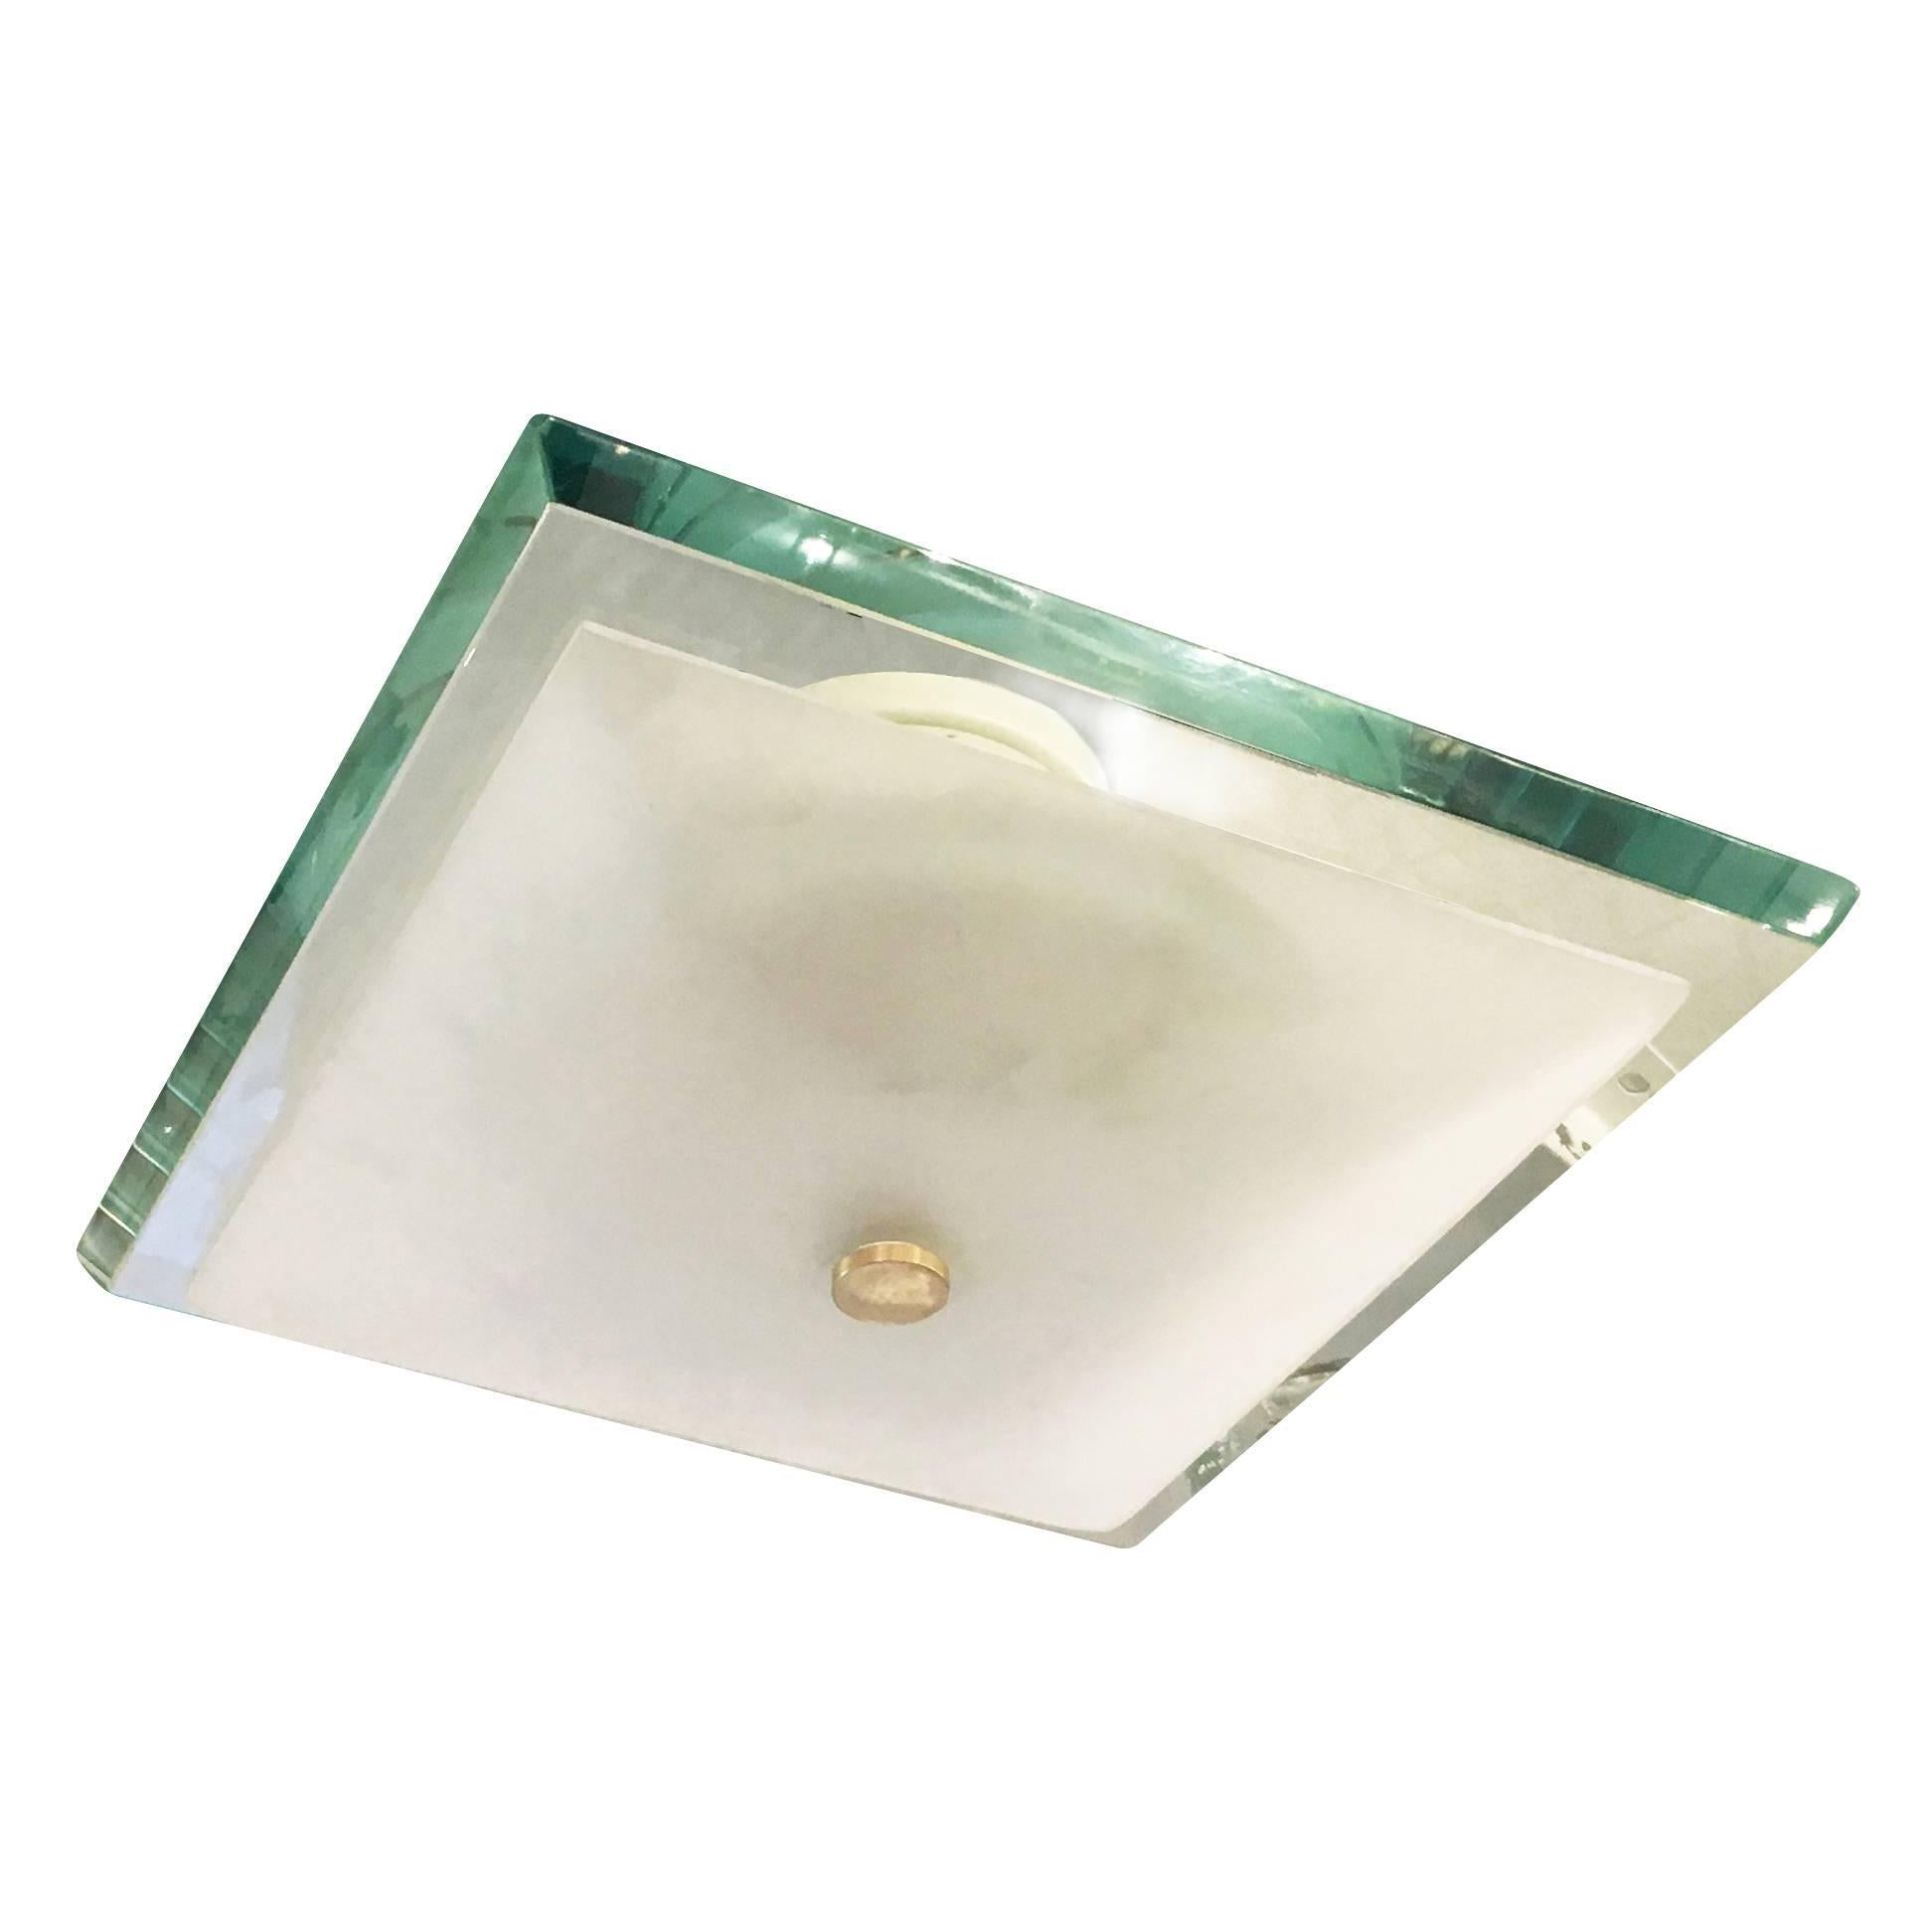 Stunning Fontana Arte flush mount designed by Max Ingrand in the 1960s featuring a thick square glass. As typical of glass of the era it has a green edge which creates a beautiful emerald color when lit or seen from certain angles. The four